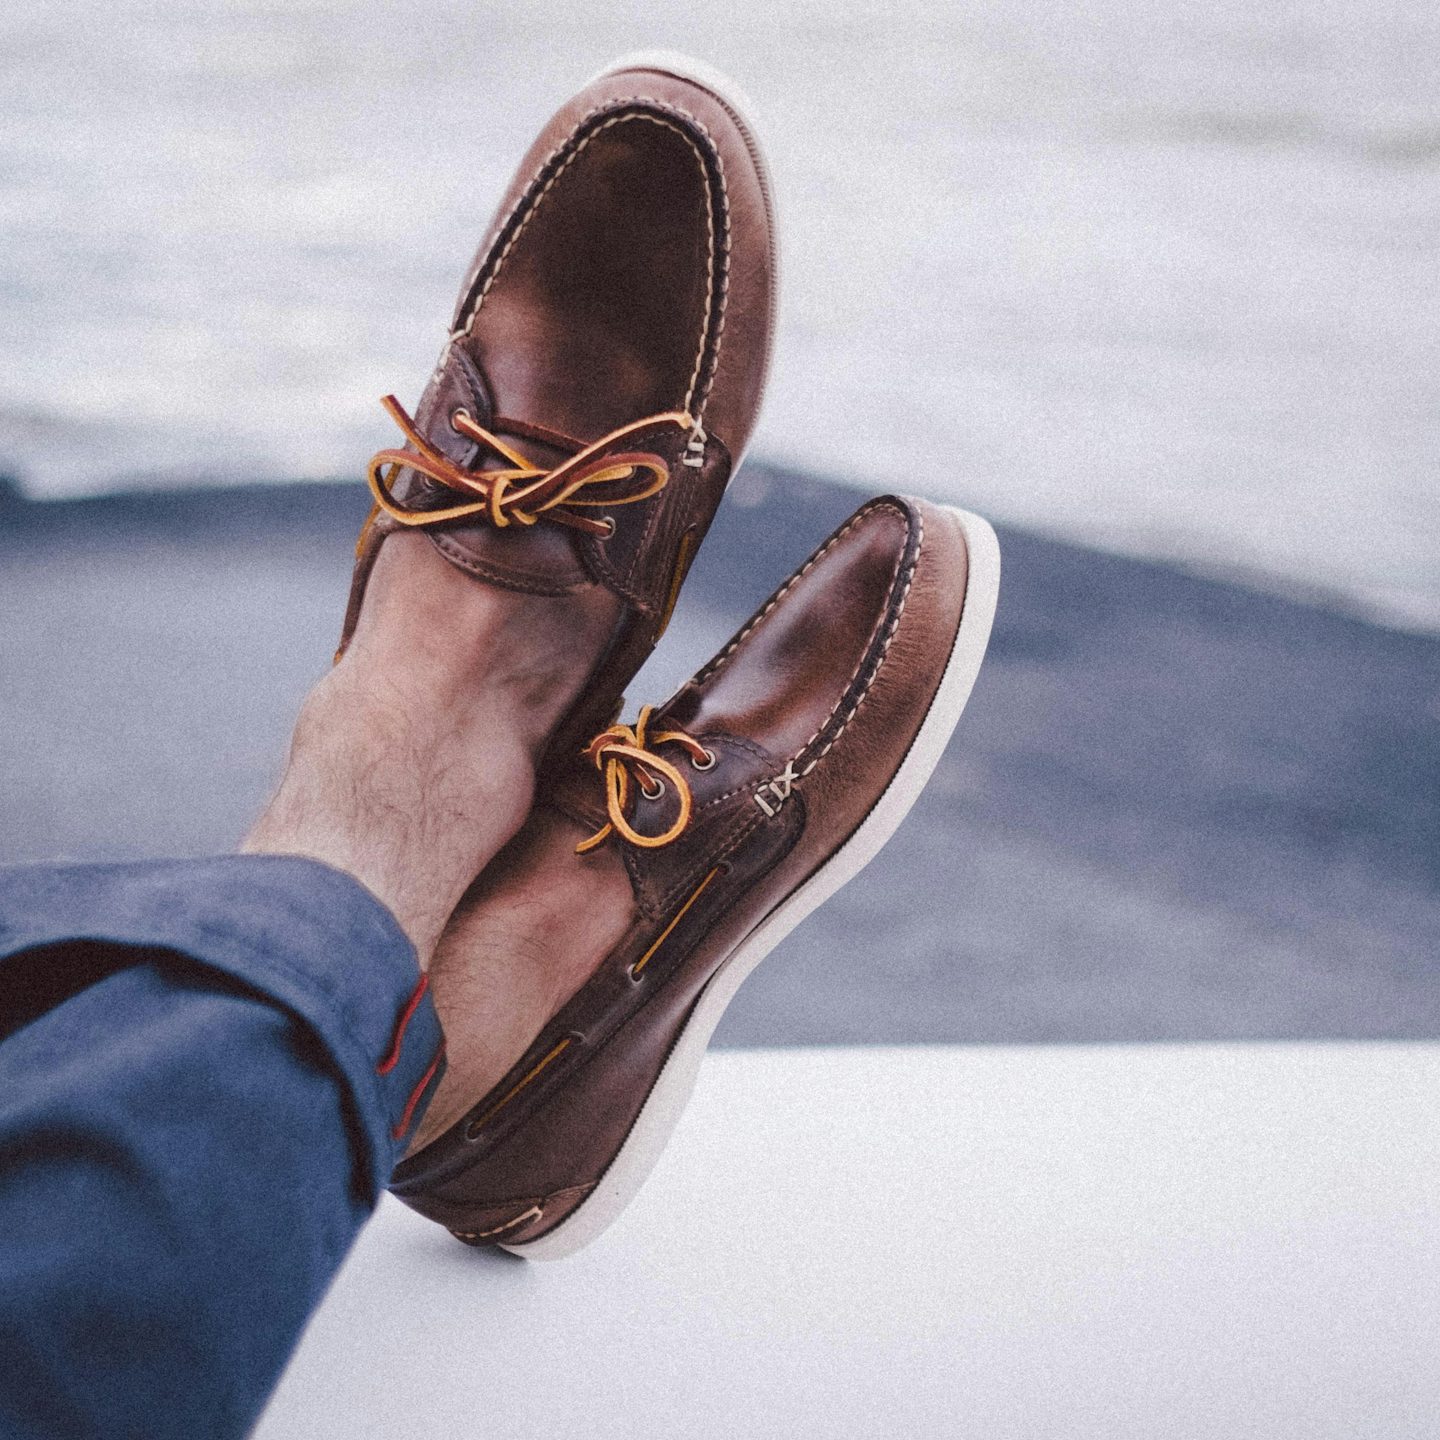 chromexcel boat shoes